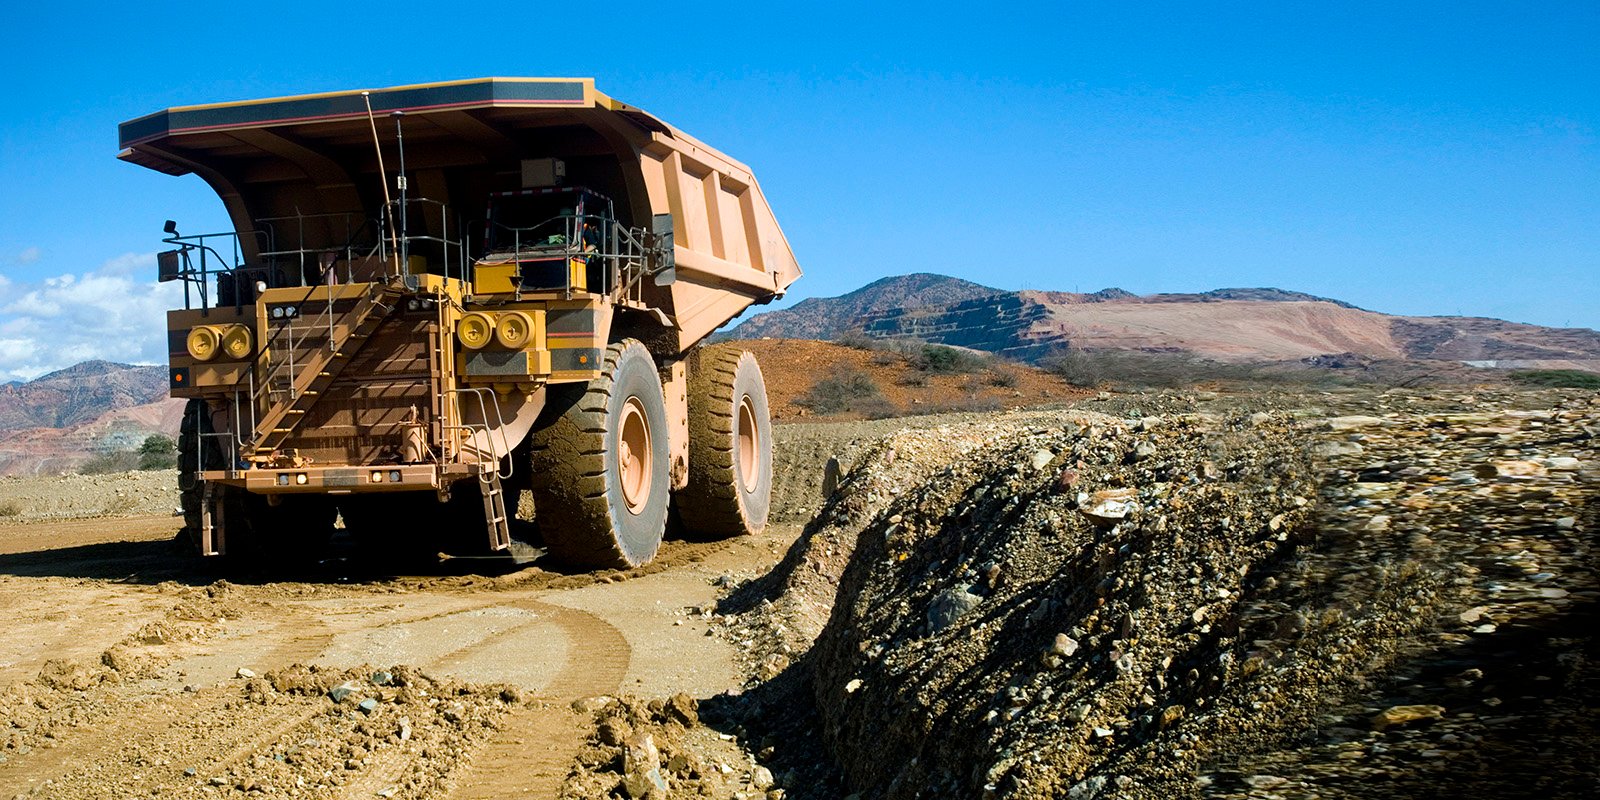 Tanzania Overhauls Mining Laws, Fines Investor US$190 Billion: Is Your Investment Protected?